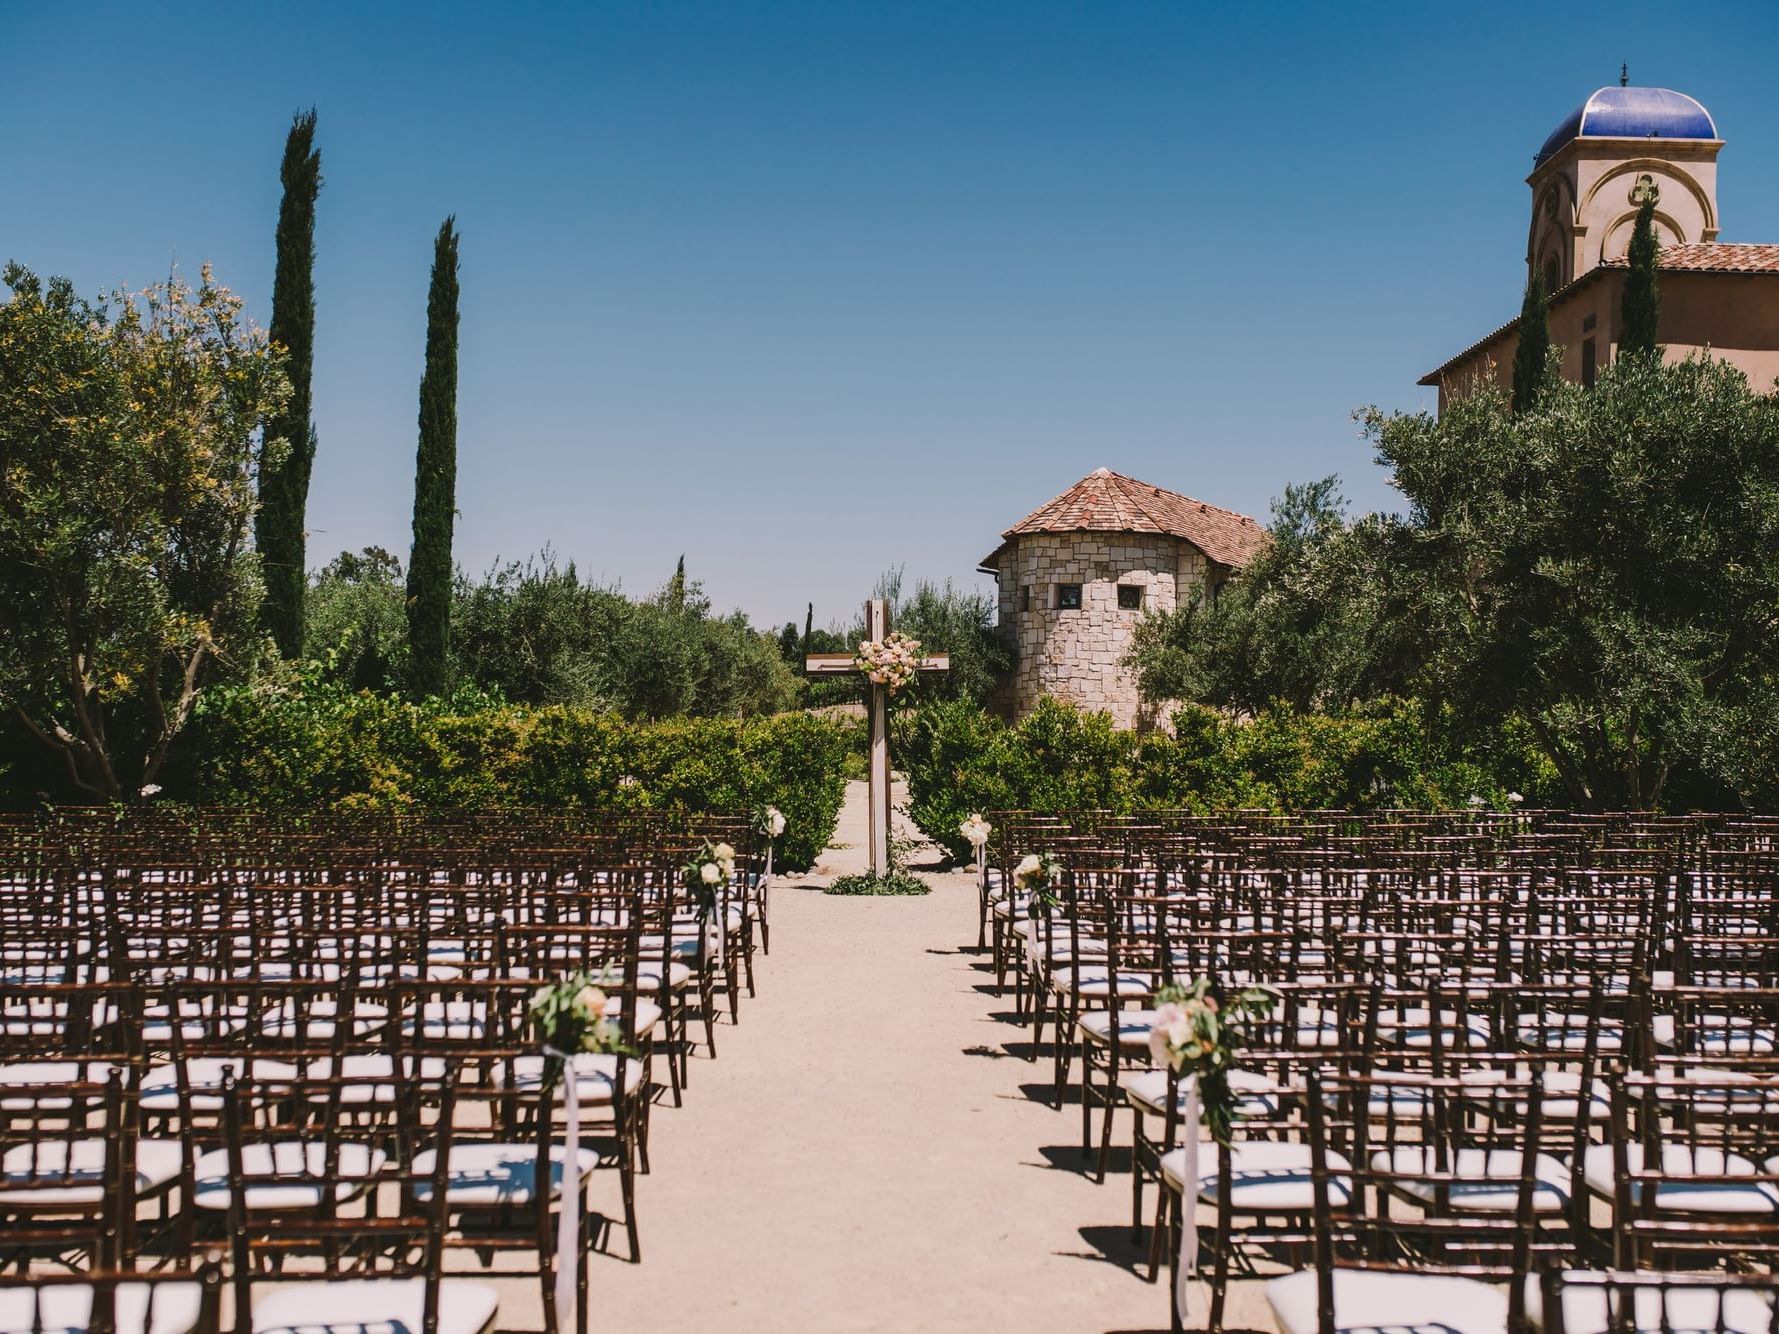 Looking down the aisle of rows of chairs set for an outdoor wedding